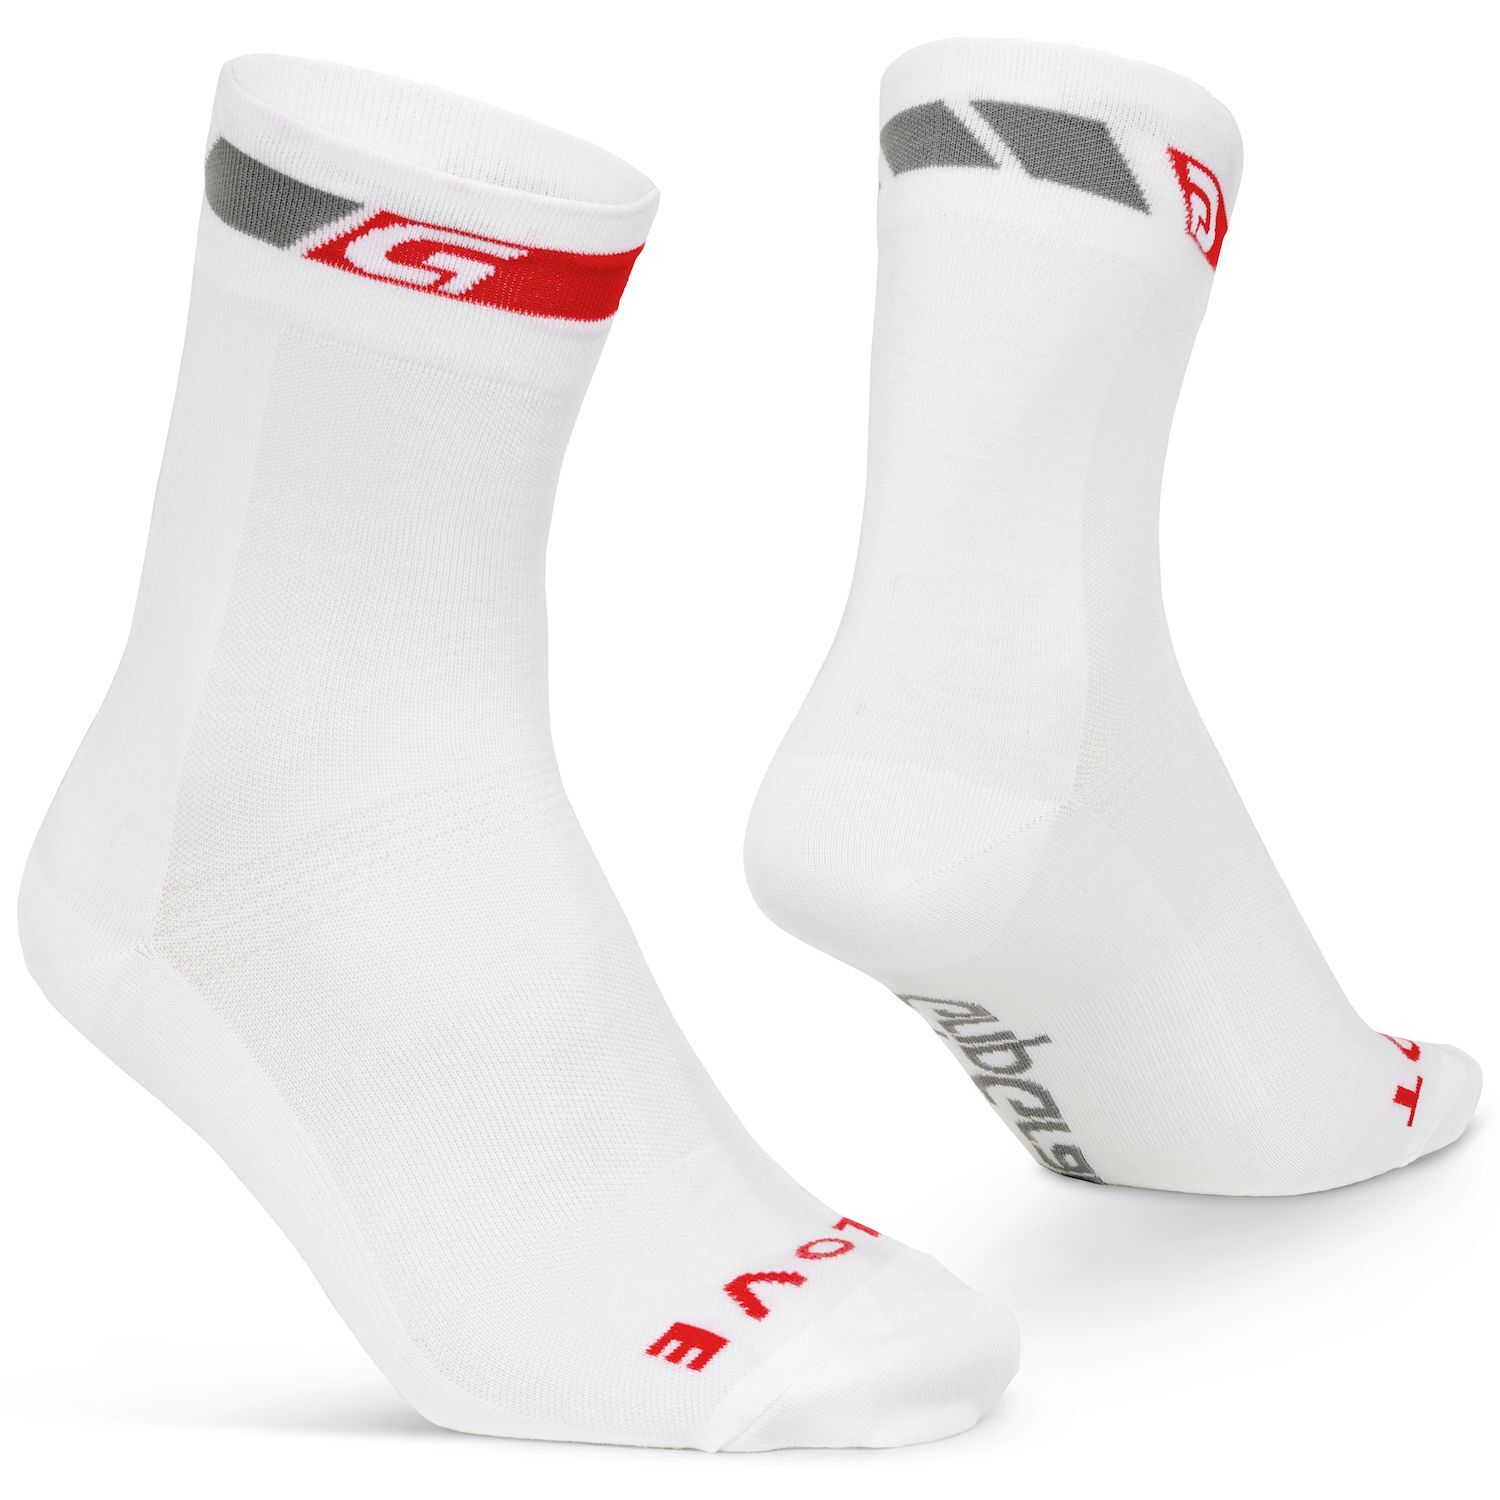 Grip Grab Classic High Cut - Calcetines ciclismo